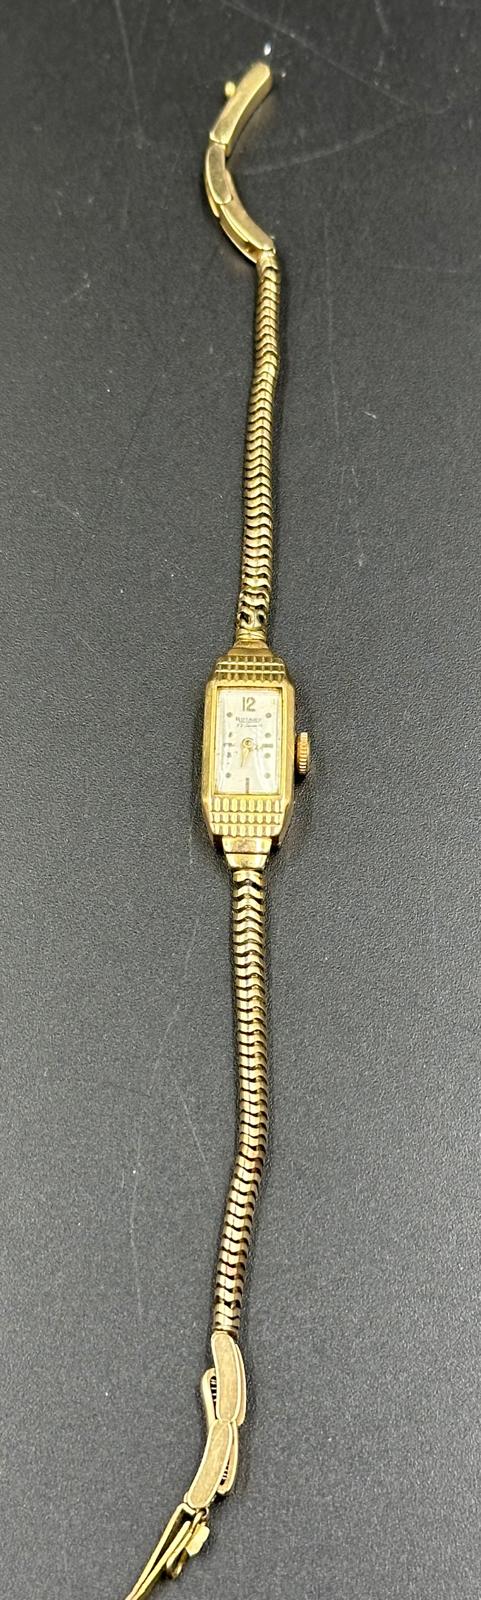 A 9ct Ladies rotary watch on 9ct gold bracelet, with an approximate total weight of 13.4g - Image 4 of 4